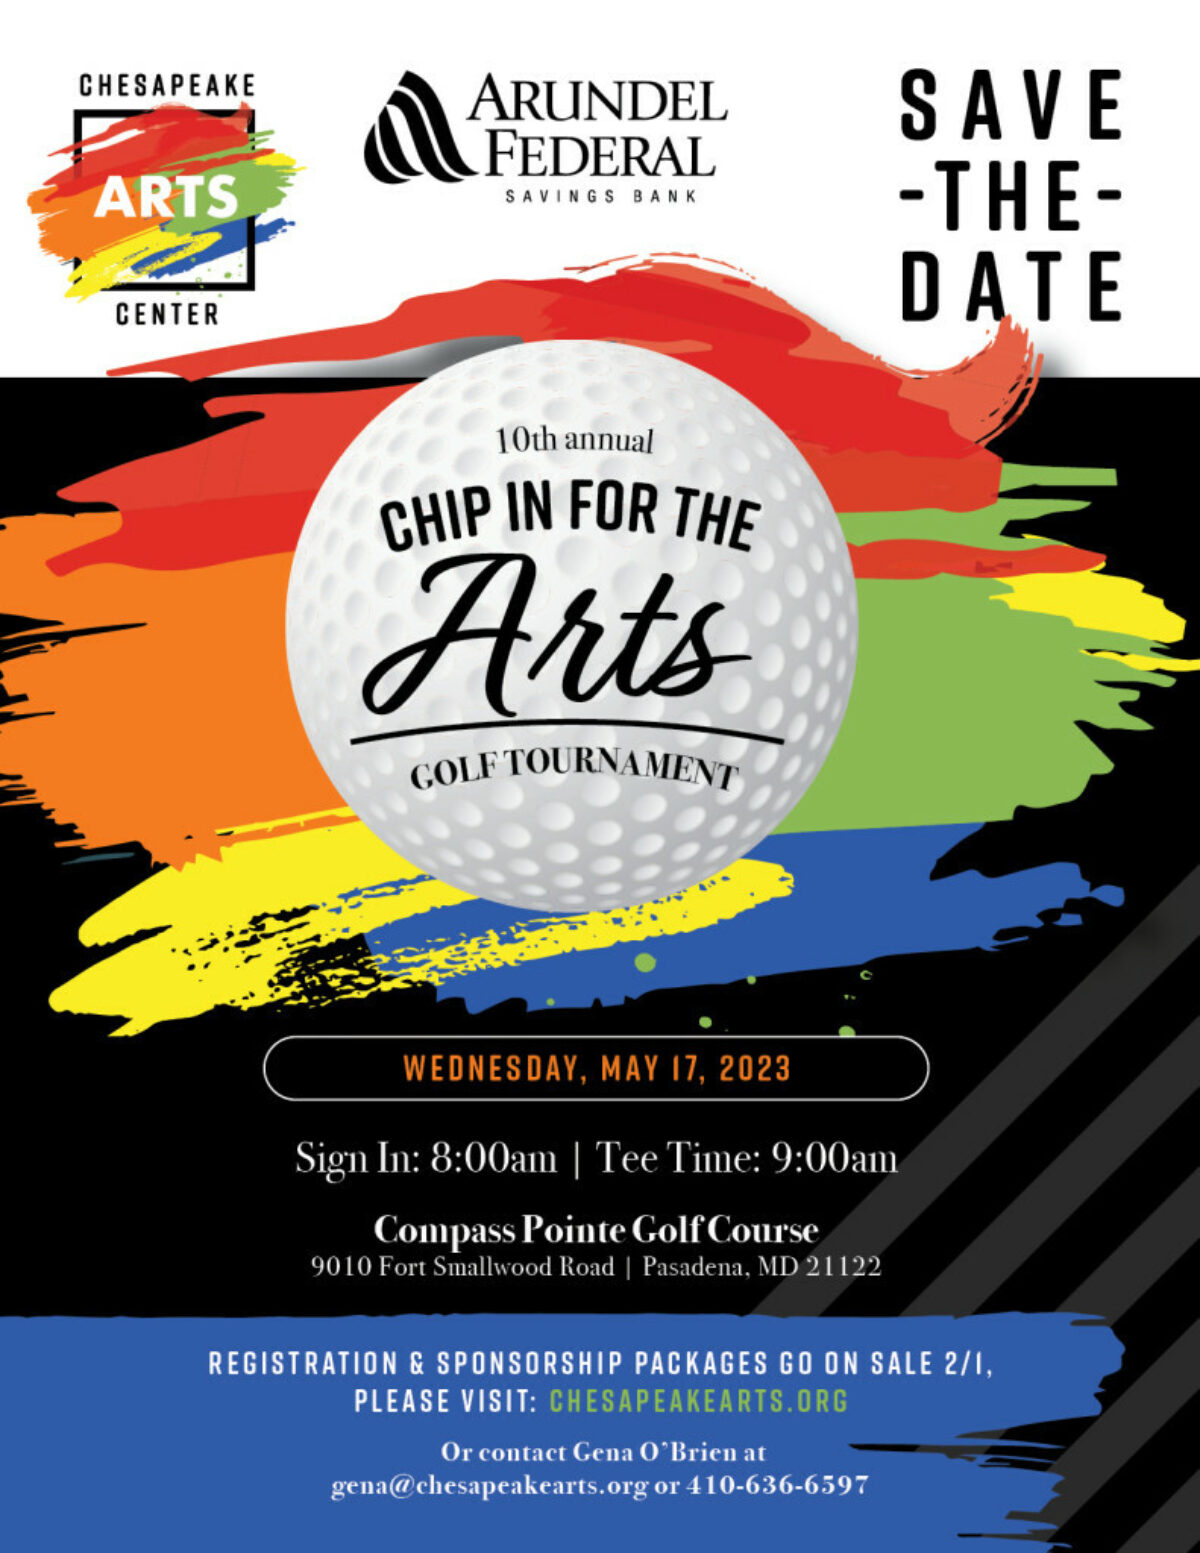 Chesapeake Art Center's 10th Annual Chip In For The Arts Golf Tournament